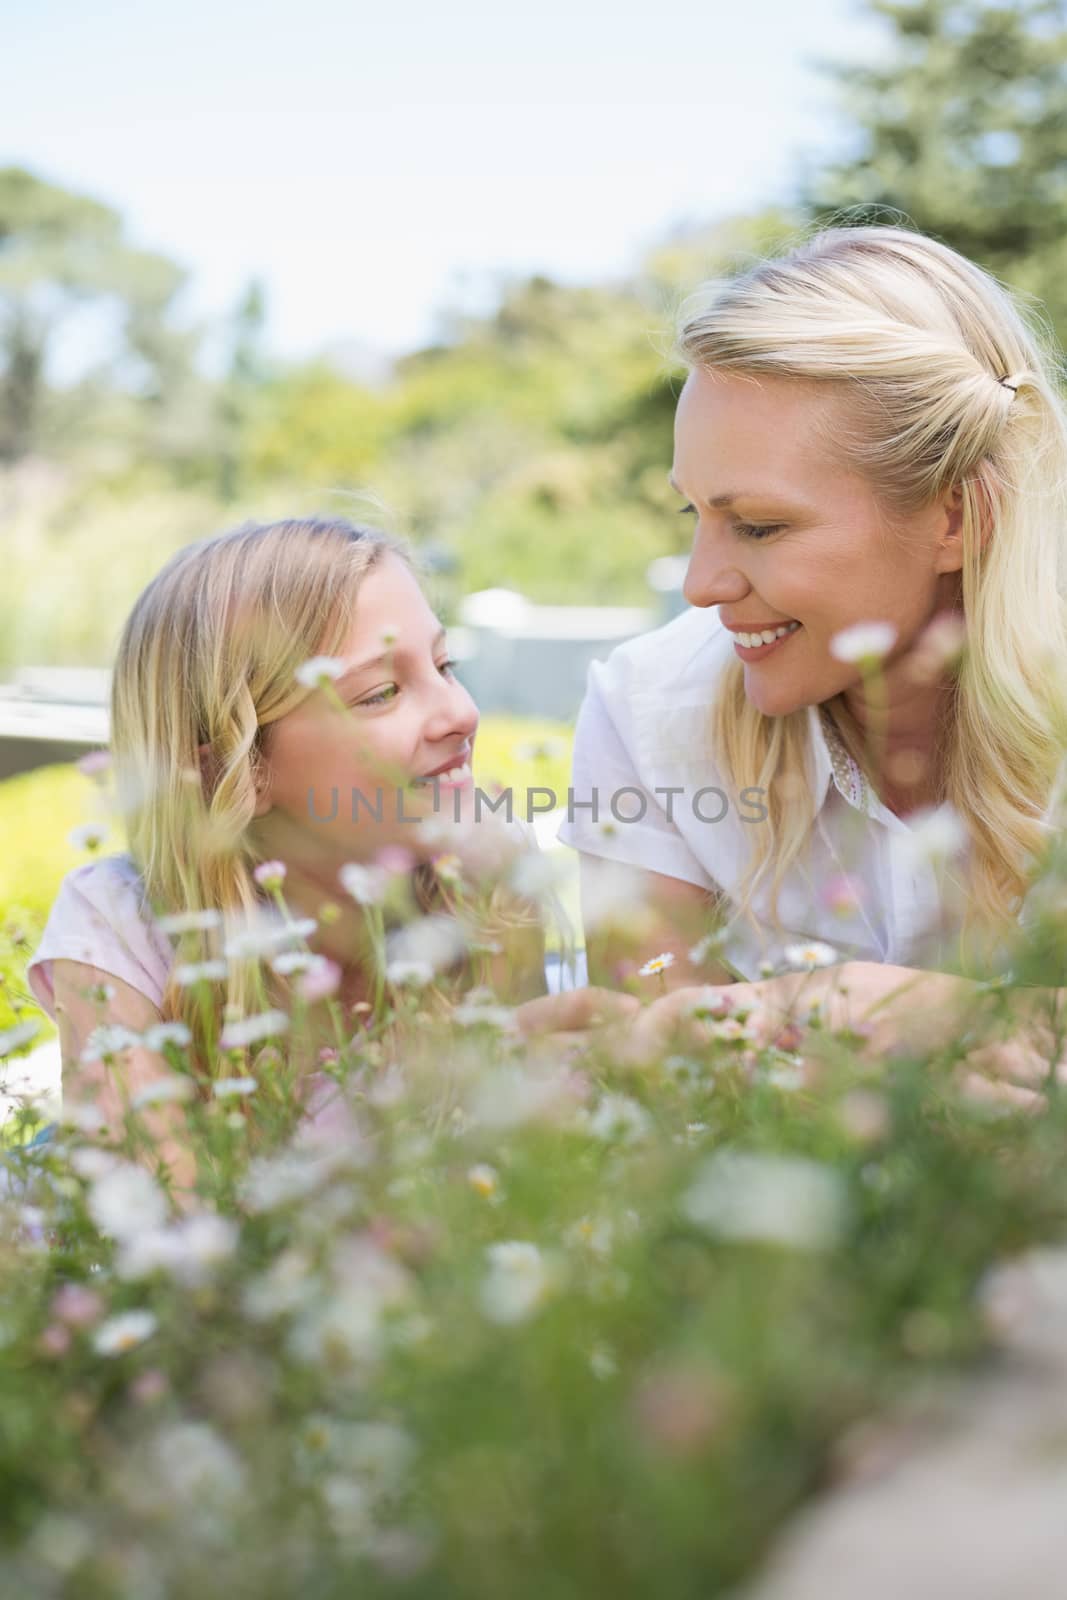 Smiling mother and daughter looking at each other while lying in park